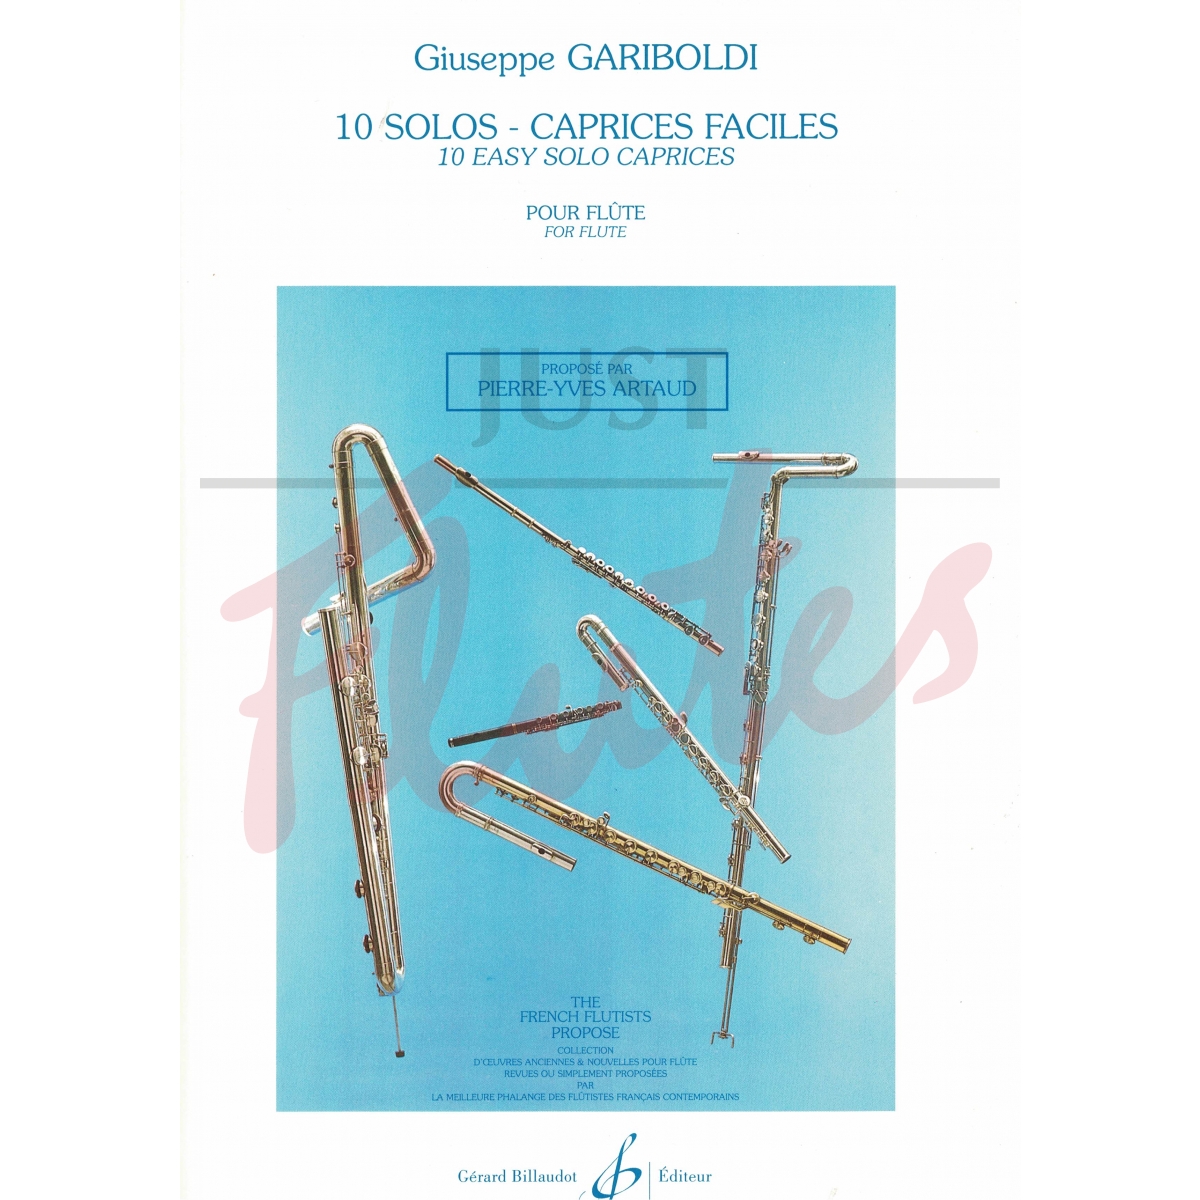 10 Easy Solo Caprices for Flute